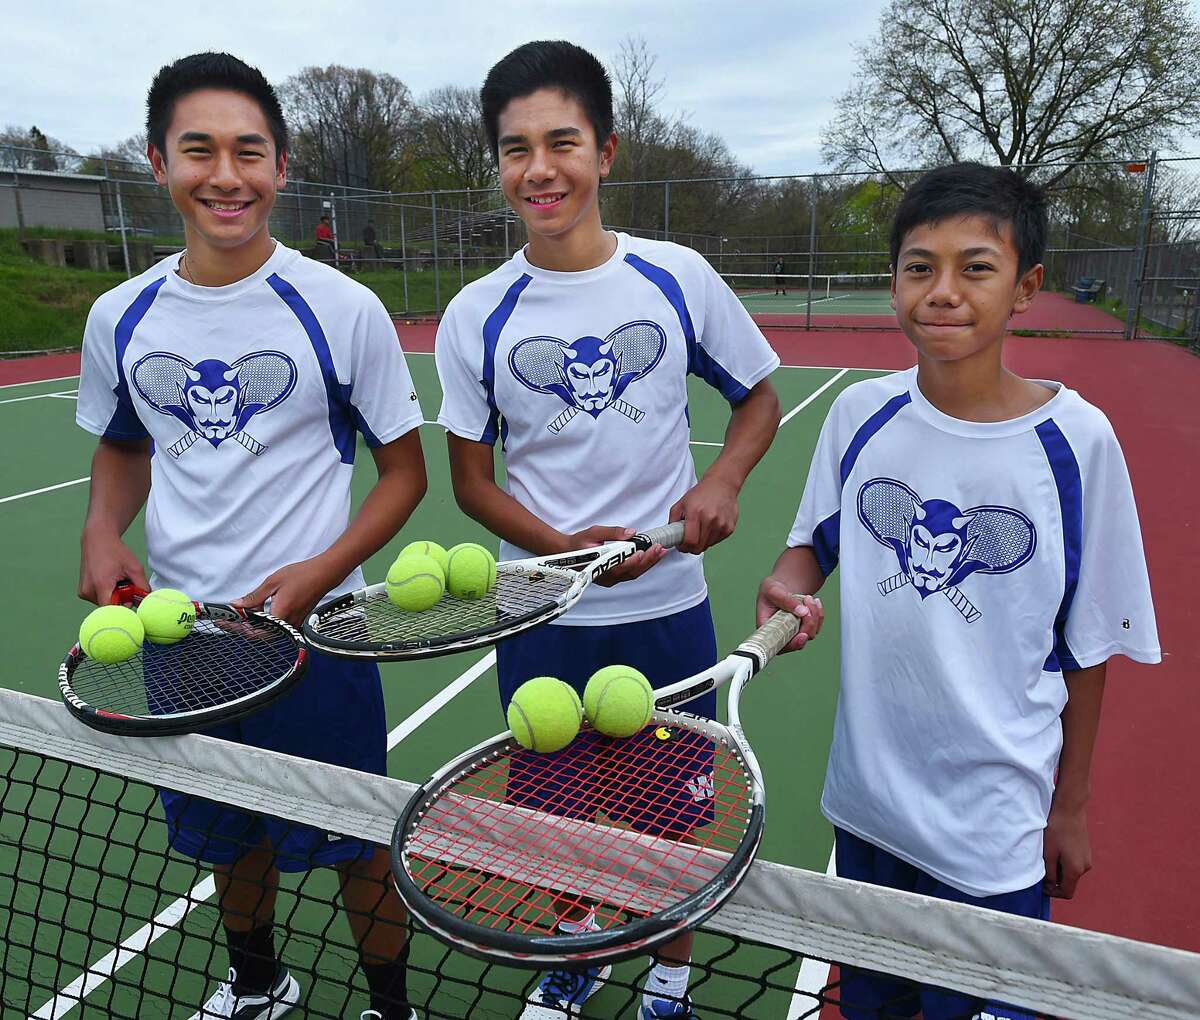 The Delgado brothers, John, a senior, James, a sophomore and Joseph, a freshman, at practice, Friday, April 29, 2016, at the courts at Painter Park in West Haven are the top seeded single players, respectively, at West Haven High School's. The Delgado brothers emigrated to the United States ten years ago from the Phillipines. (Catherine Avalone/New Haven Register)